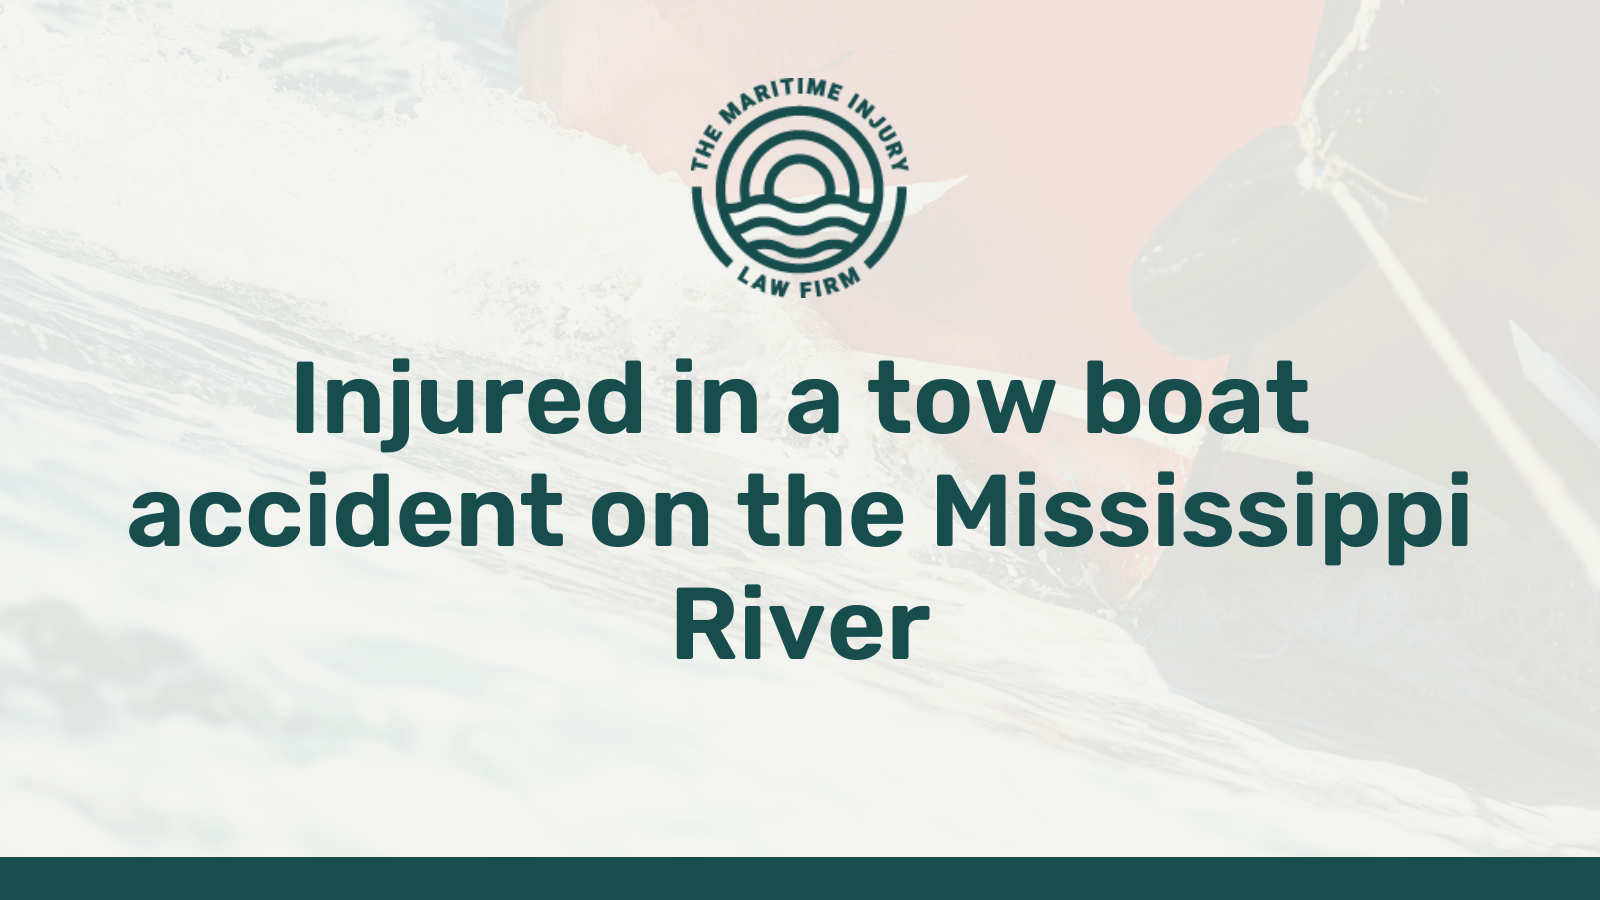 Injured in a tow boat accident on the Mississippi River - maritime injury law firm - George Vourvoulias